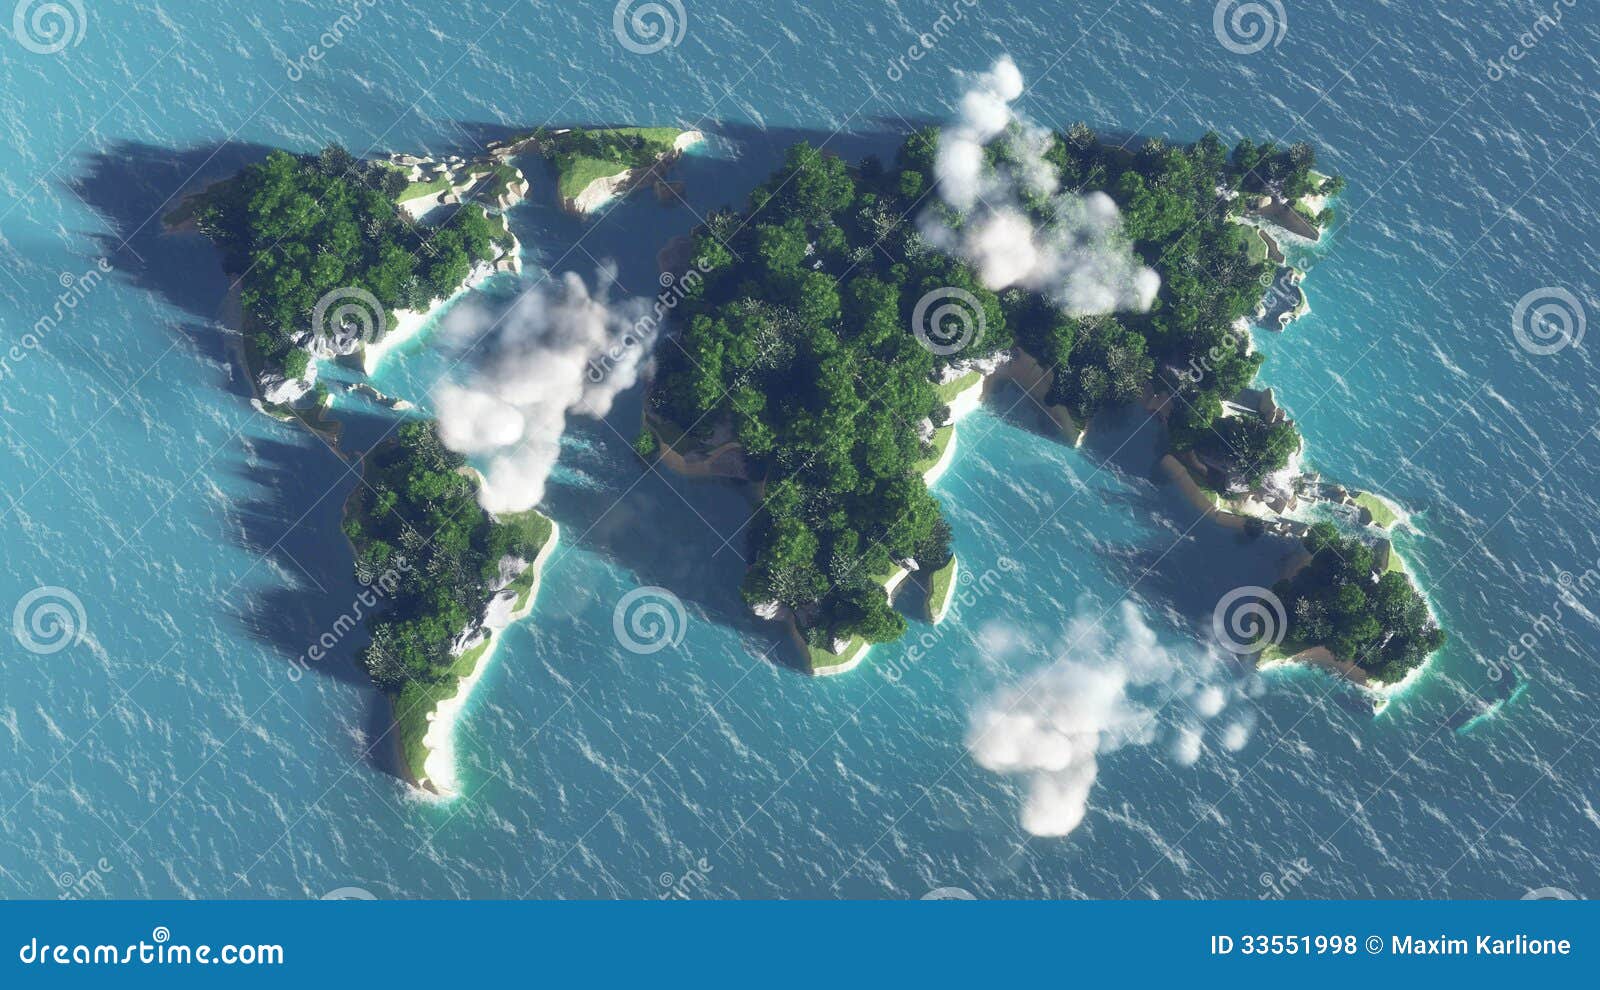 A recent map of 'live' and 'ghost' tree islands in Water